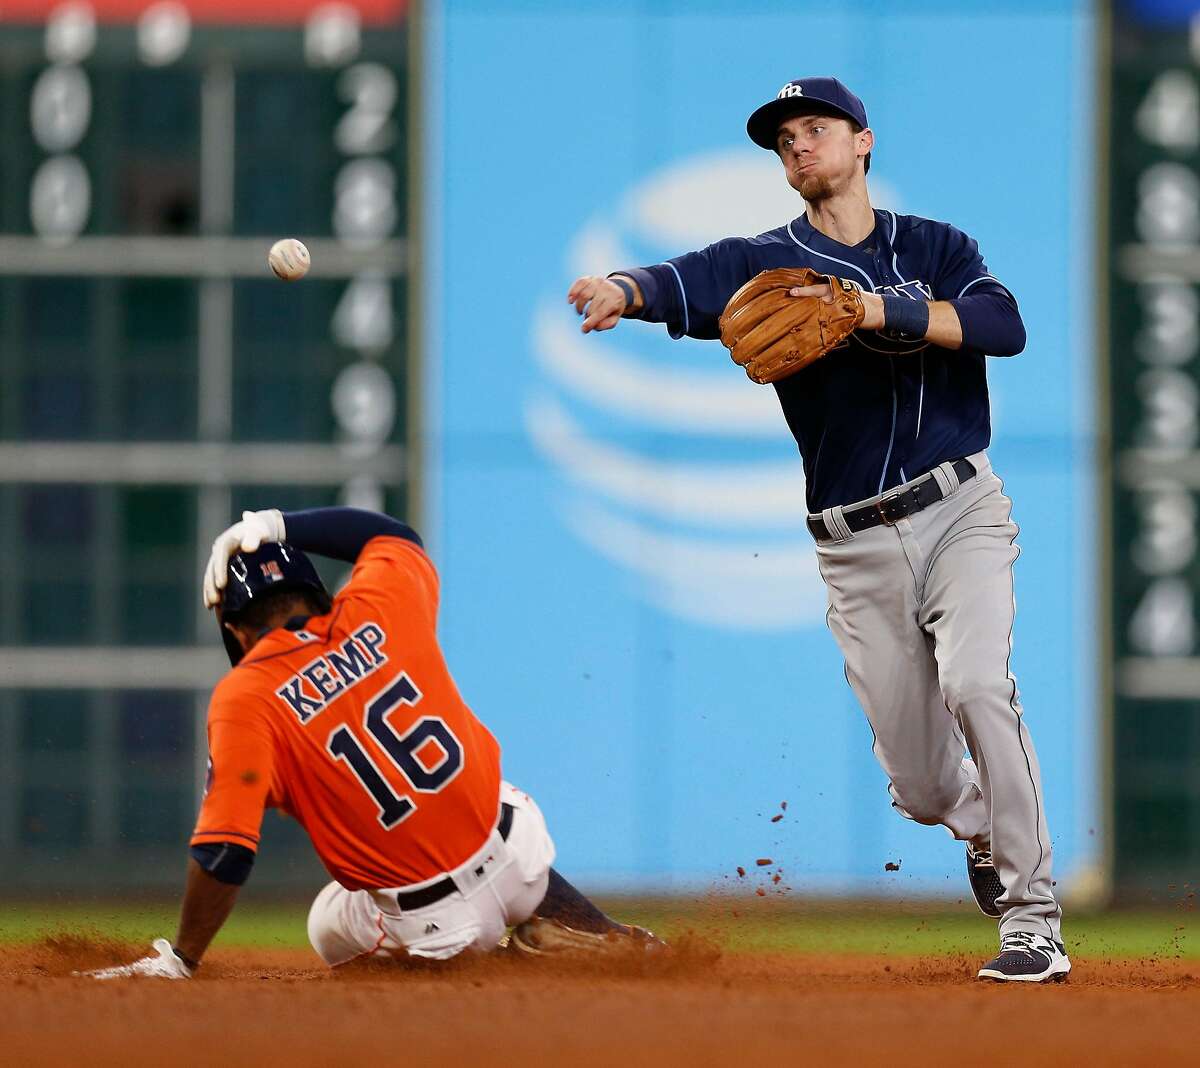 Tampa Bay Rays shortstop Matt Duffy (5) makes the throw to first after tagging Houston Astros Tony Kemp (16) out as Marwin Gonzalez grounded into a double play in the seventh inning of an MLB game at Minute Maid Park, Friday, Aug. 26, 2016 in Houston. ( Karen Warren / Houston Chronicle )